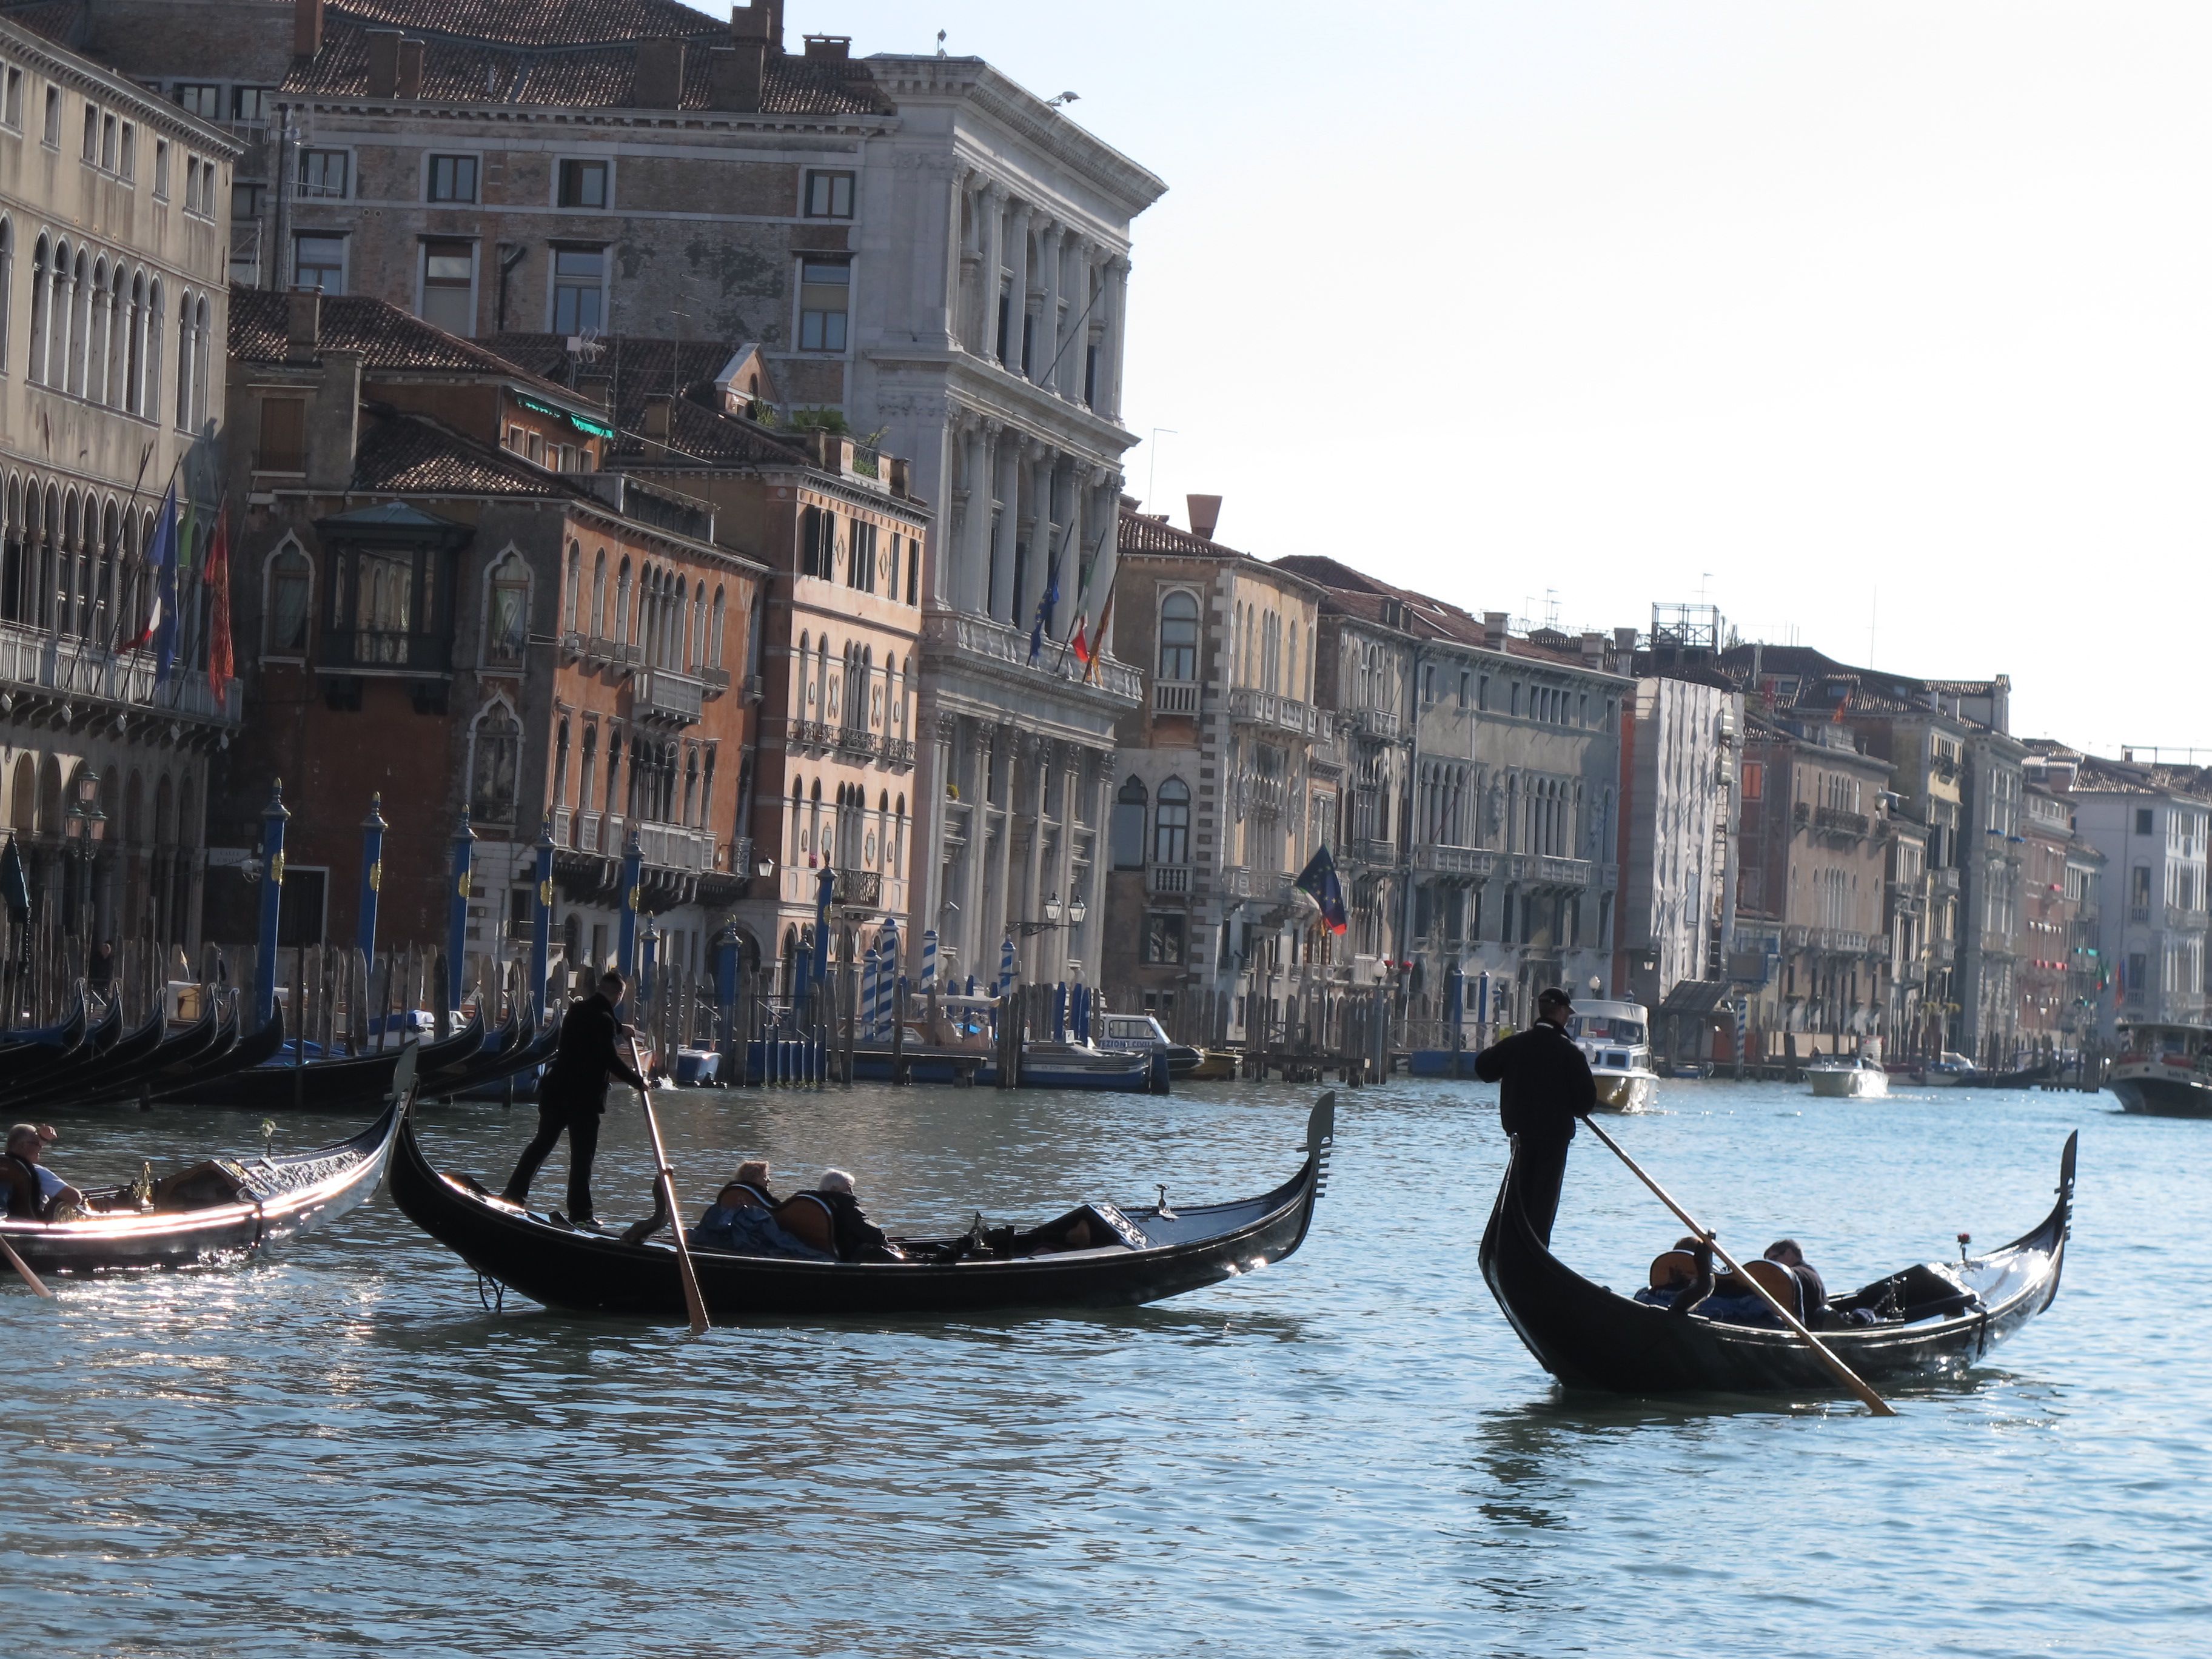 Gondoliers on Venice's Grand Canal.